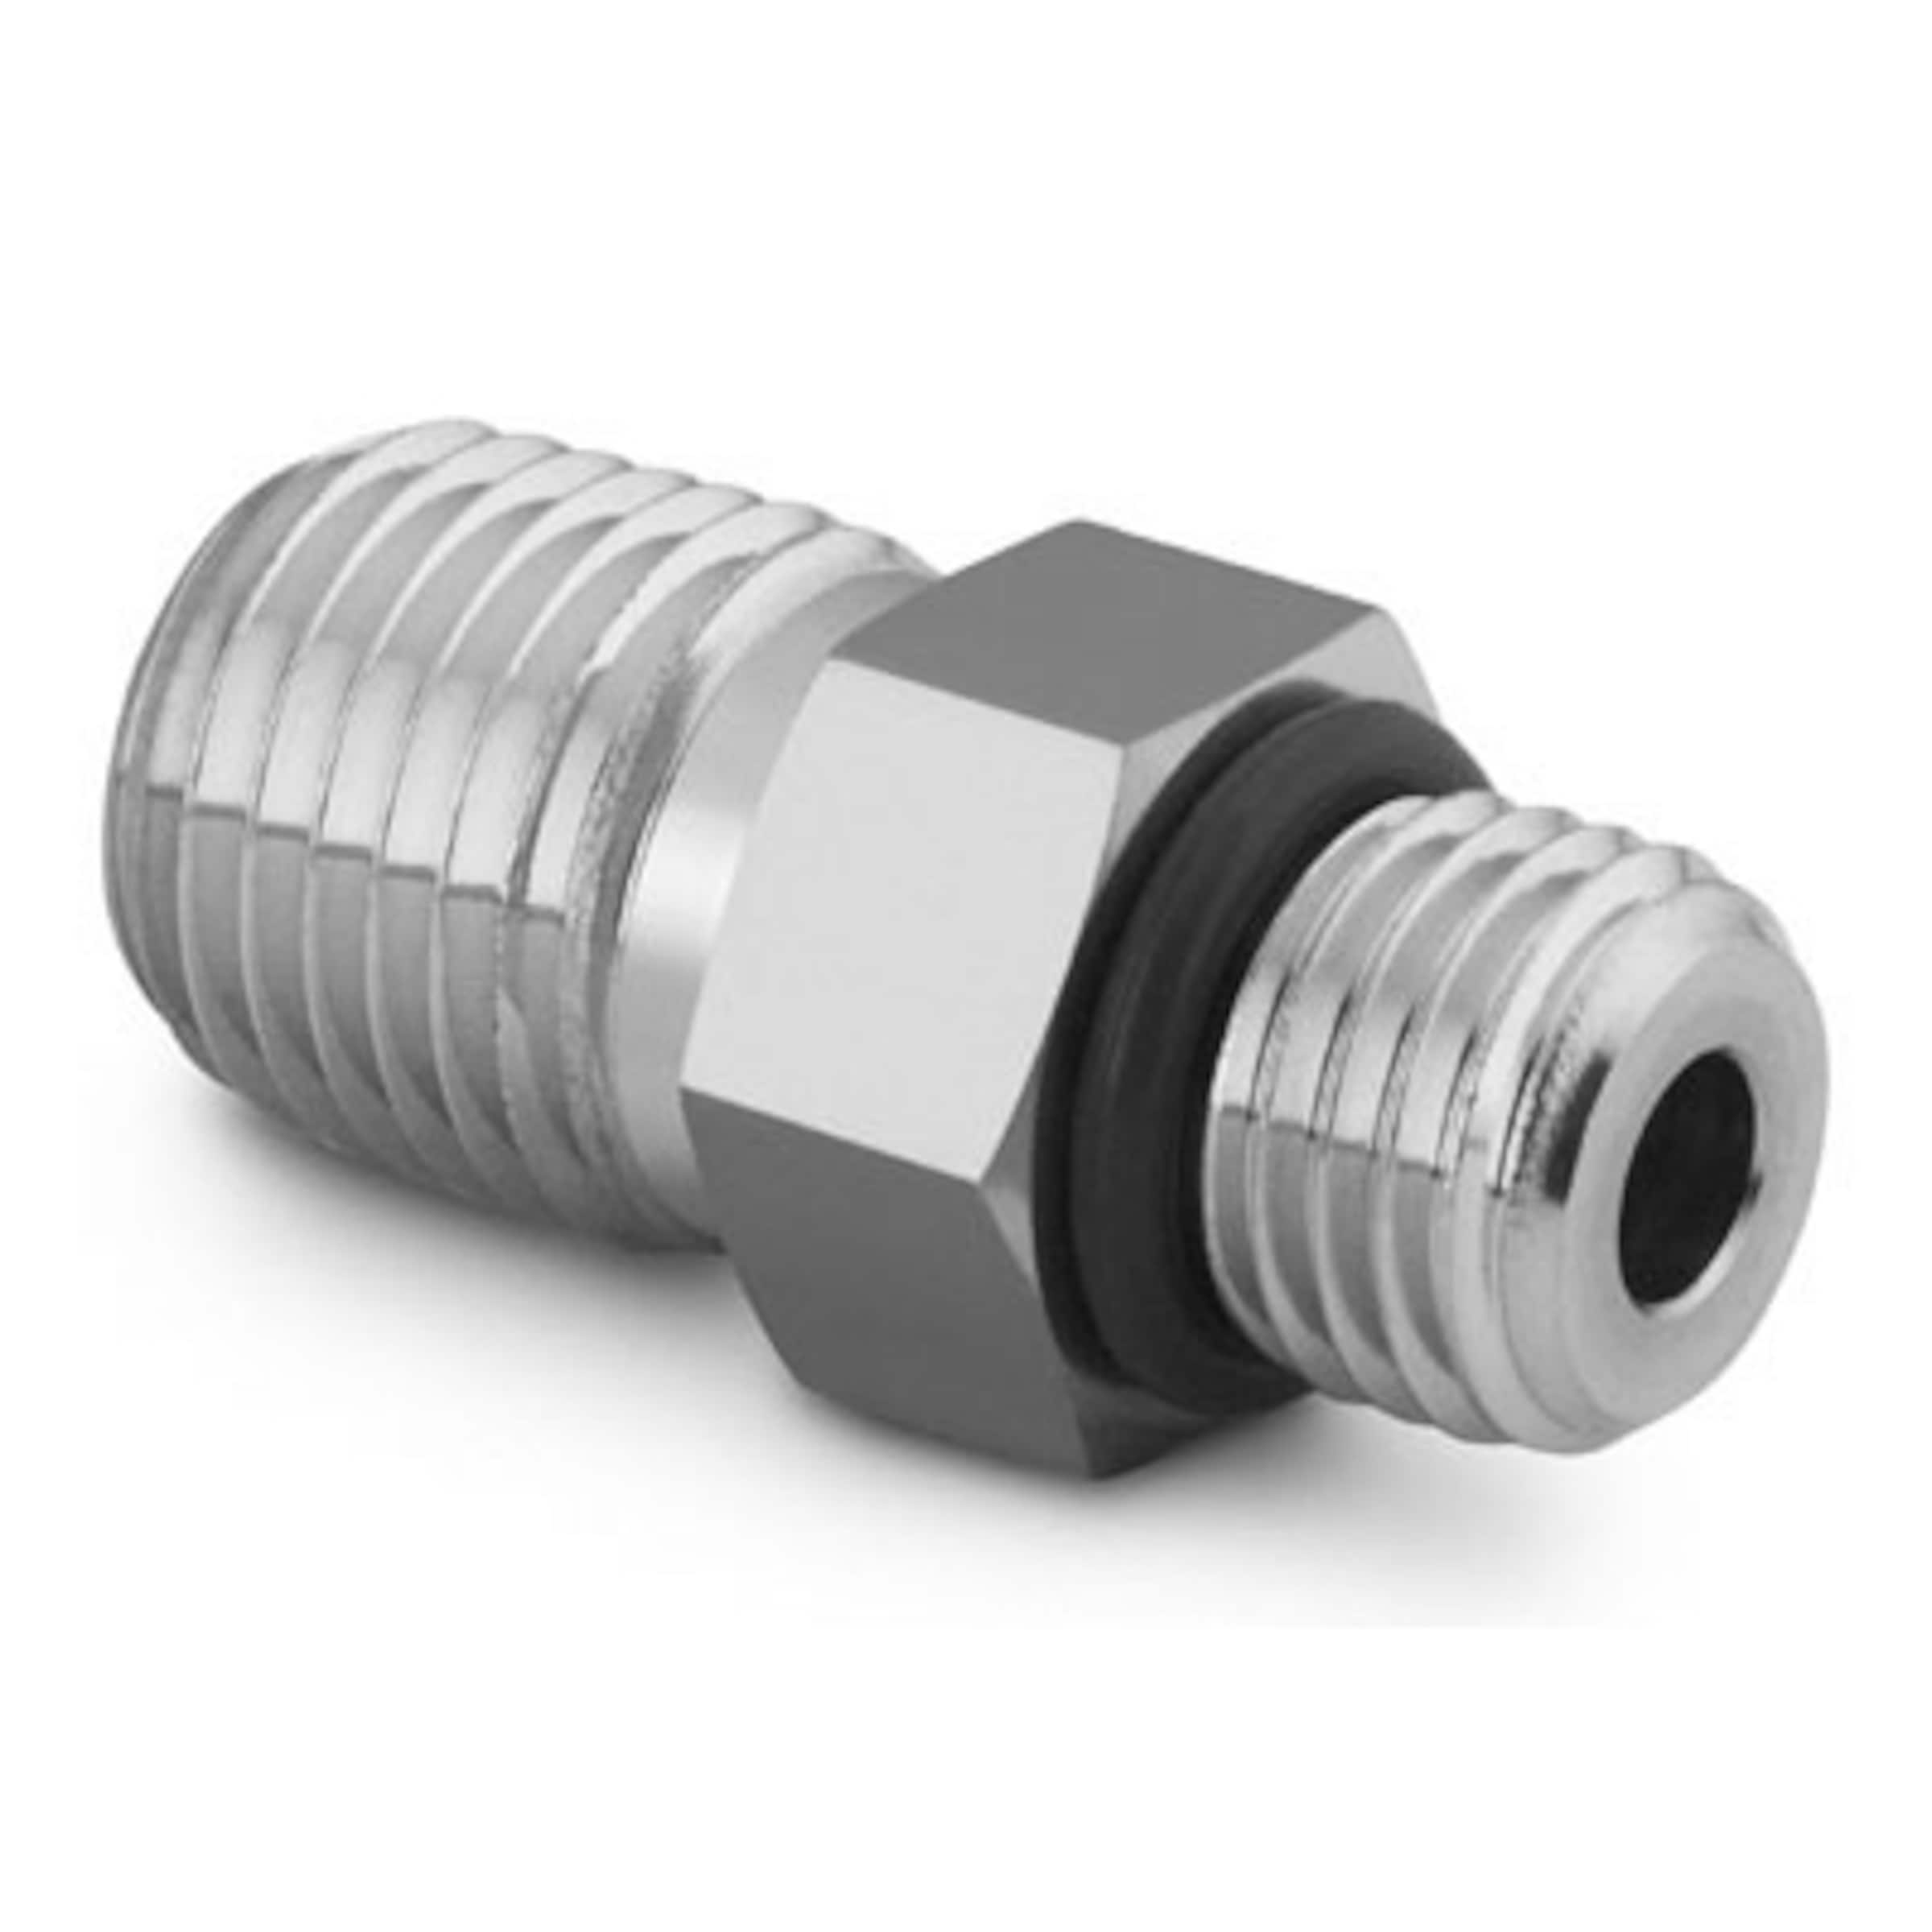 Male Thread, BSPT Hose Tail Adaptor 316 Stainless Steel Pipe Fitting